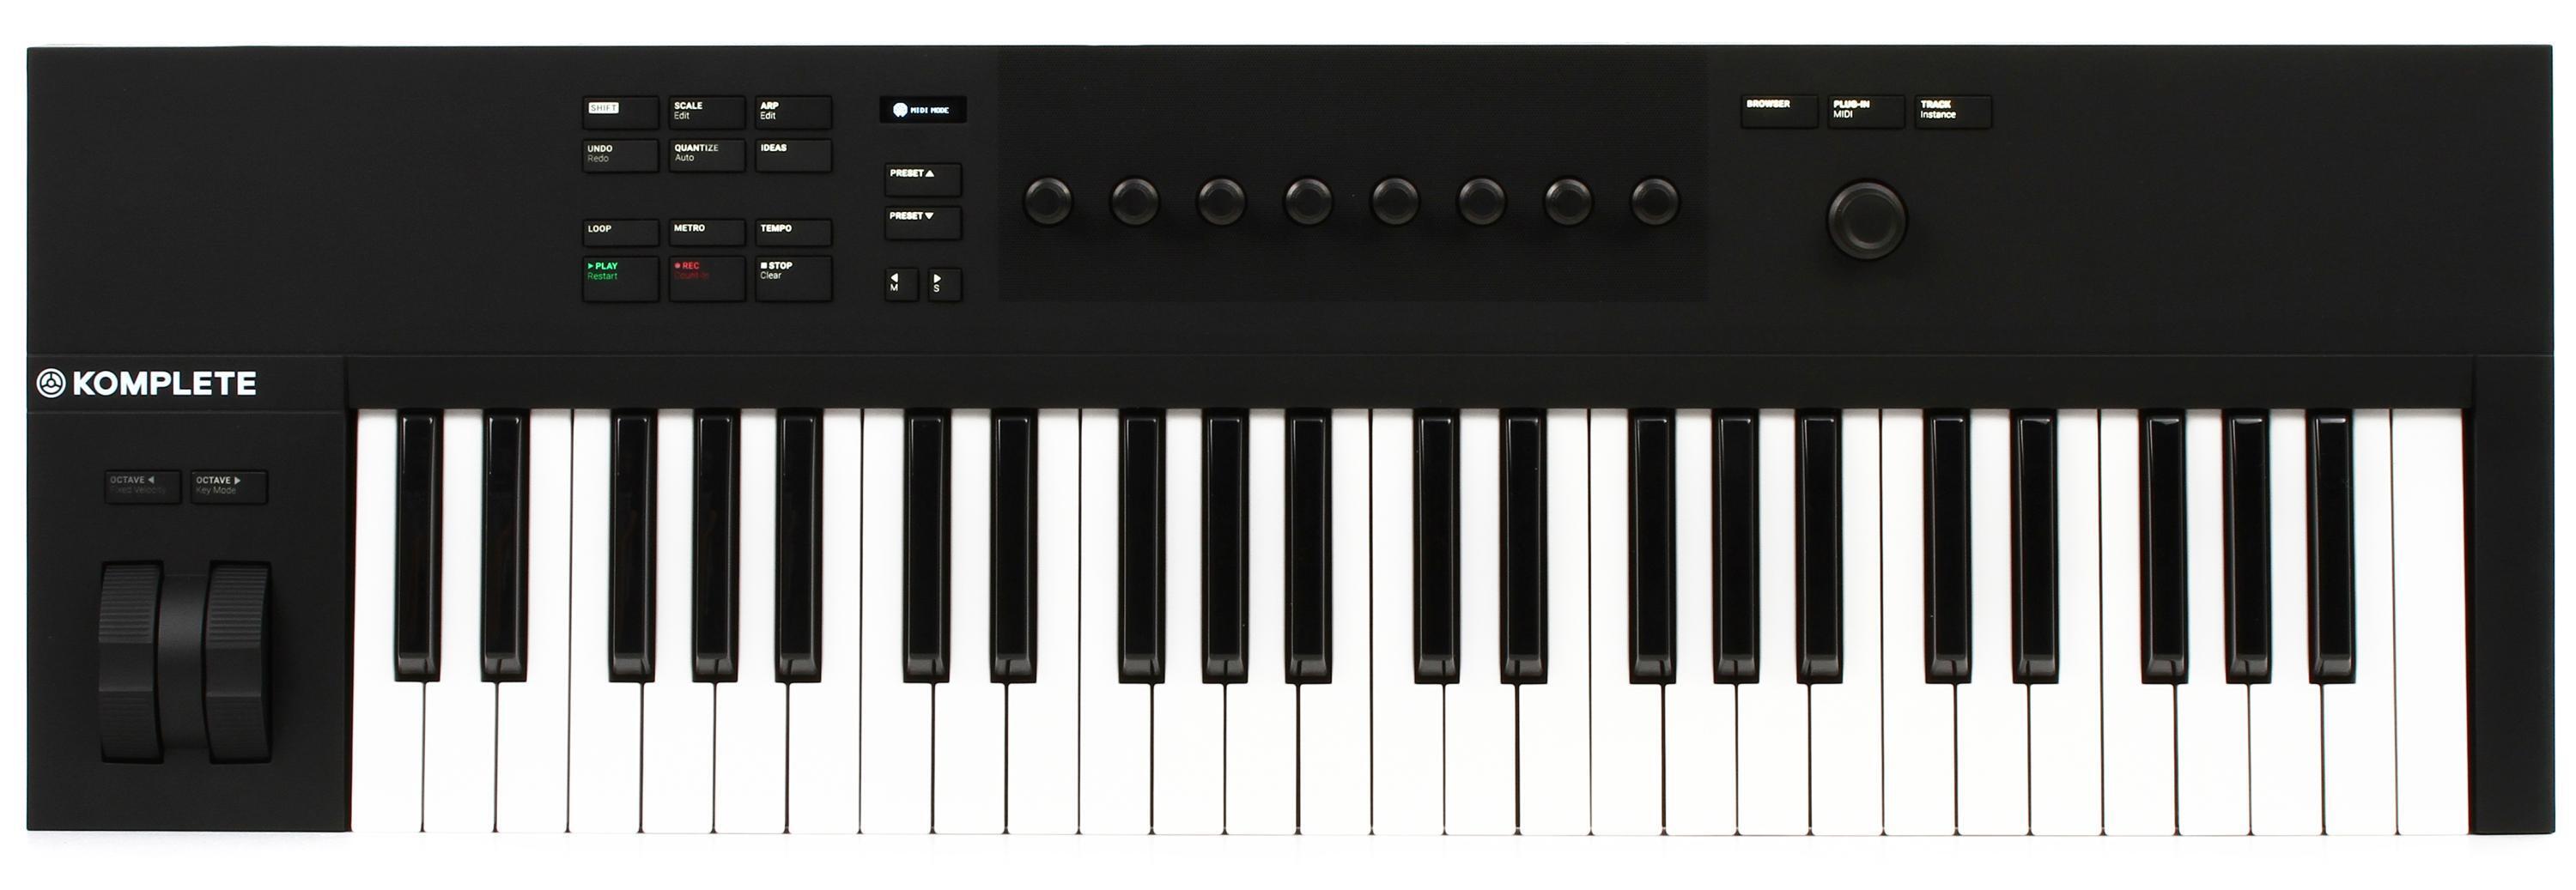 Roland A-500 PRO 49-key Keyboard Controller | Sweetwater